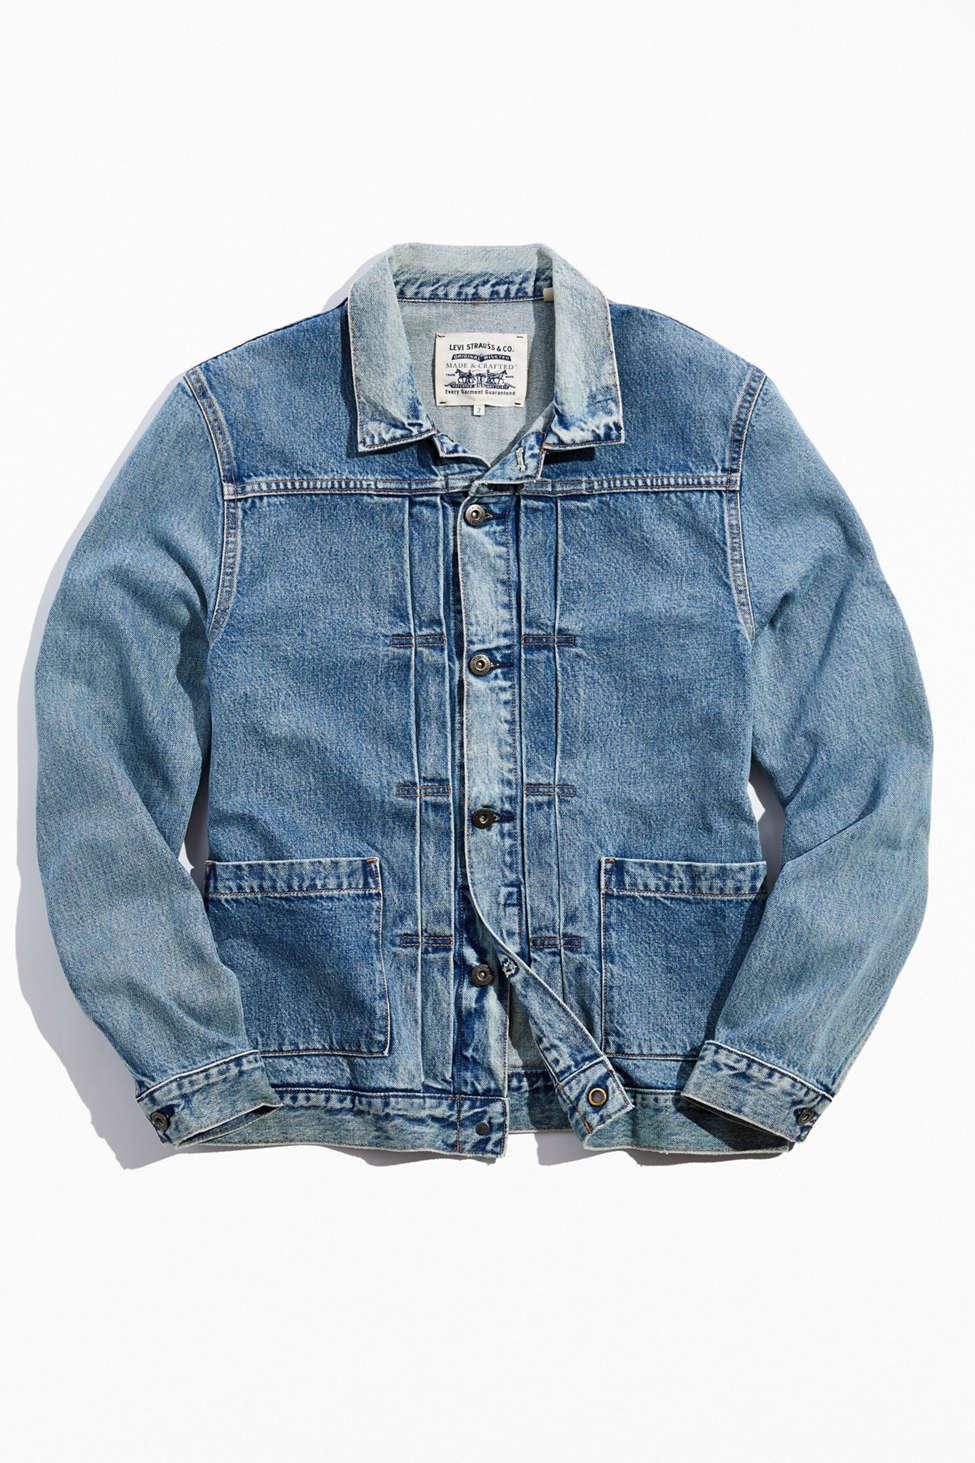 Levi's Levi's Made & Crafted Type Ii Worn Denim Trucker Jacket in Blue ...